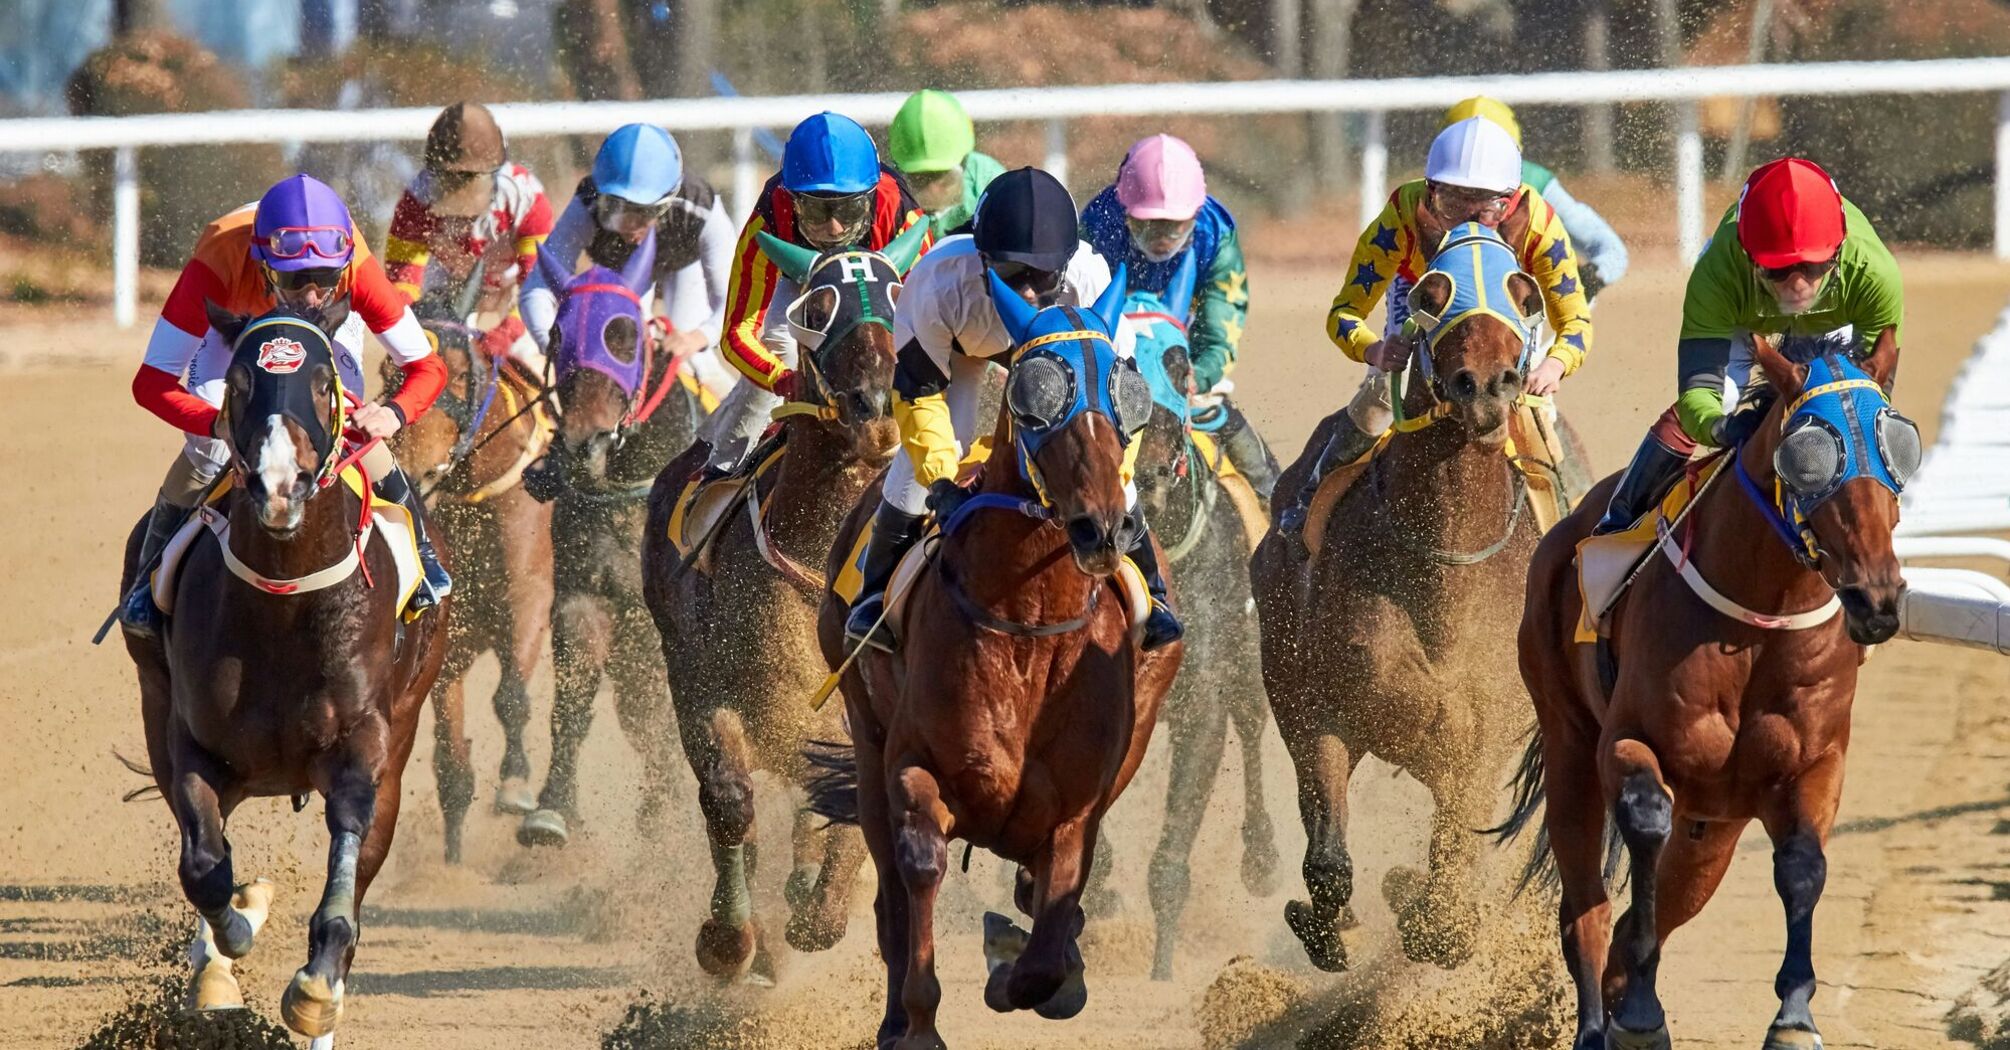 A group of jockeys on horseback racing on a dirt track, kicking up dust as they compete 